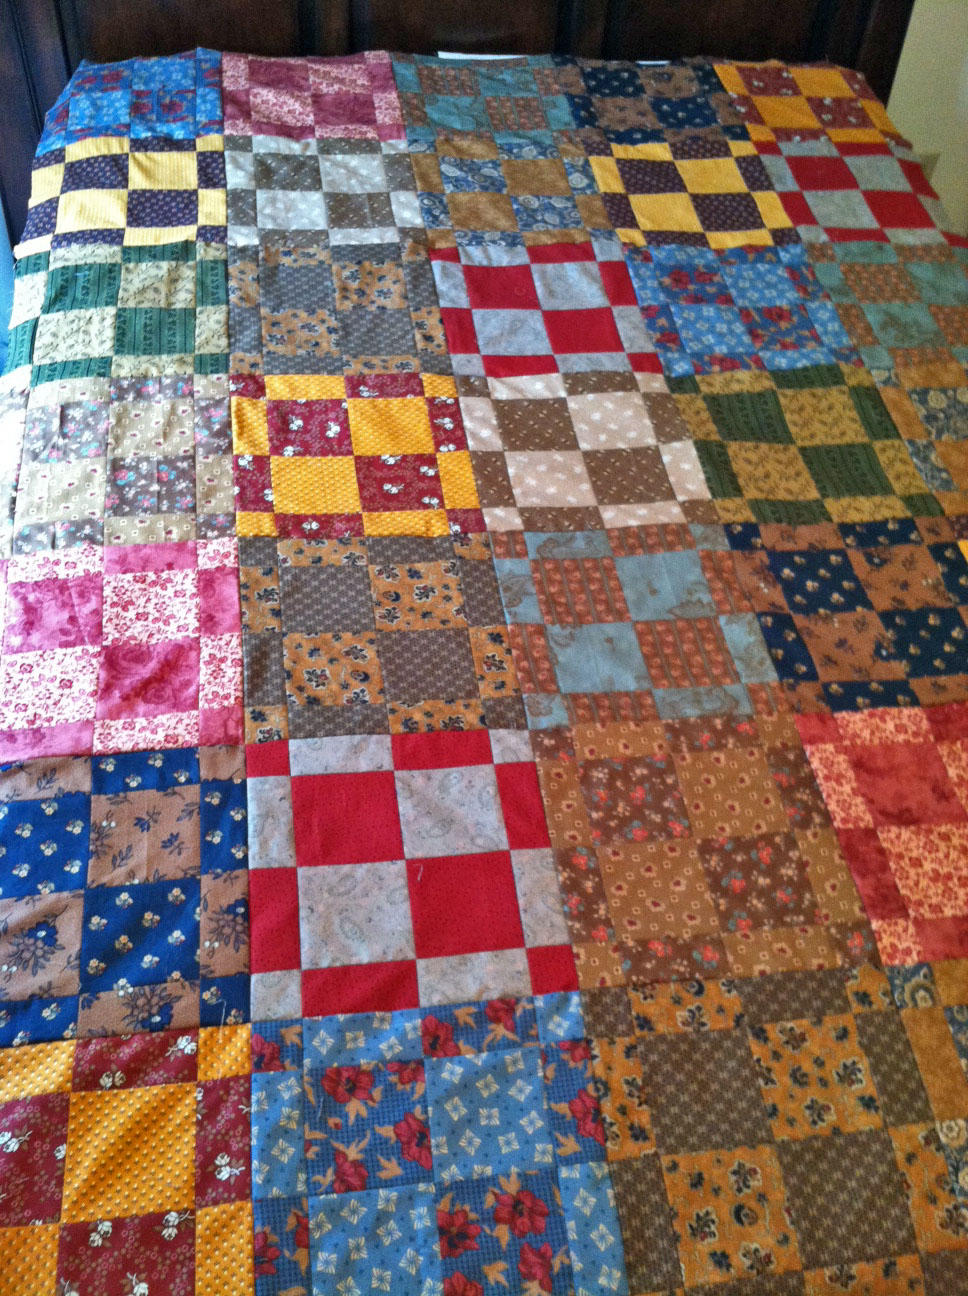 Jayne's Quilting Room: Carson's Courtyard